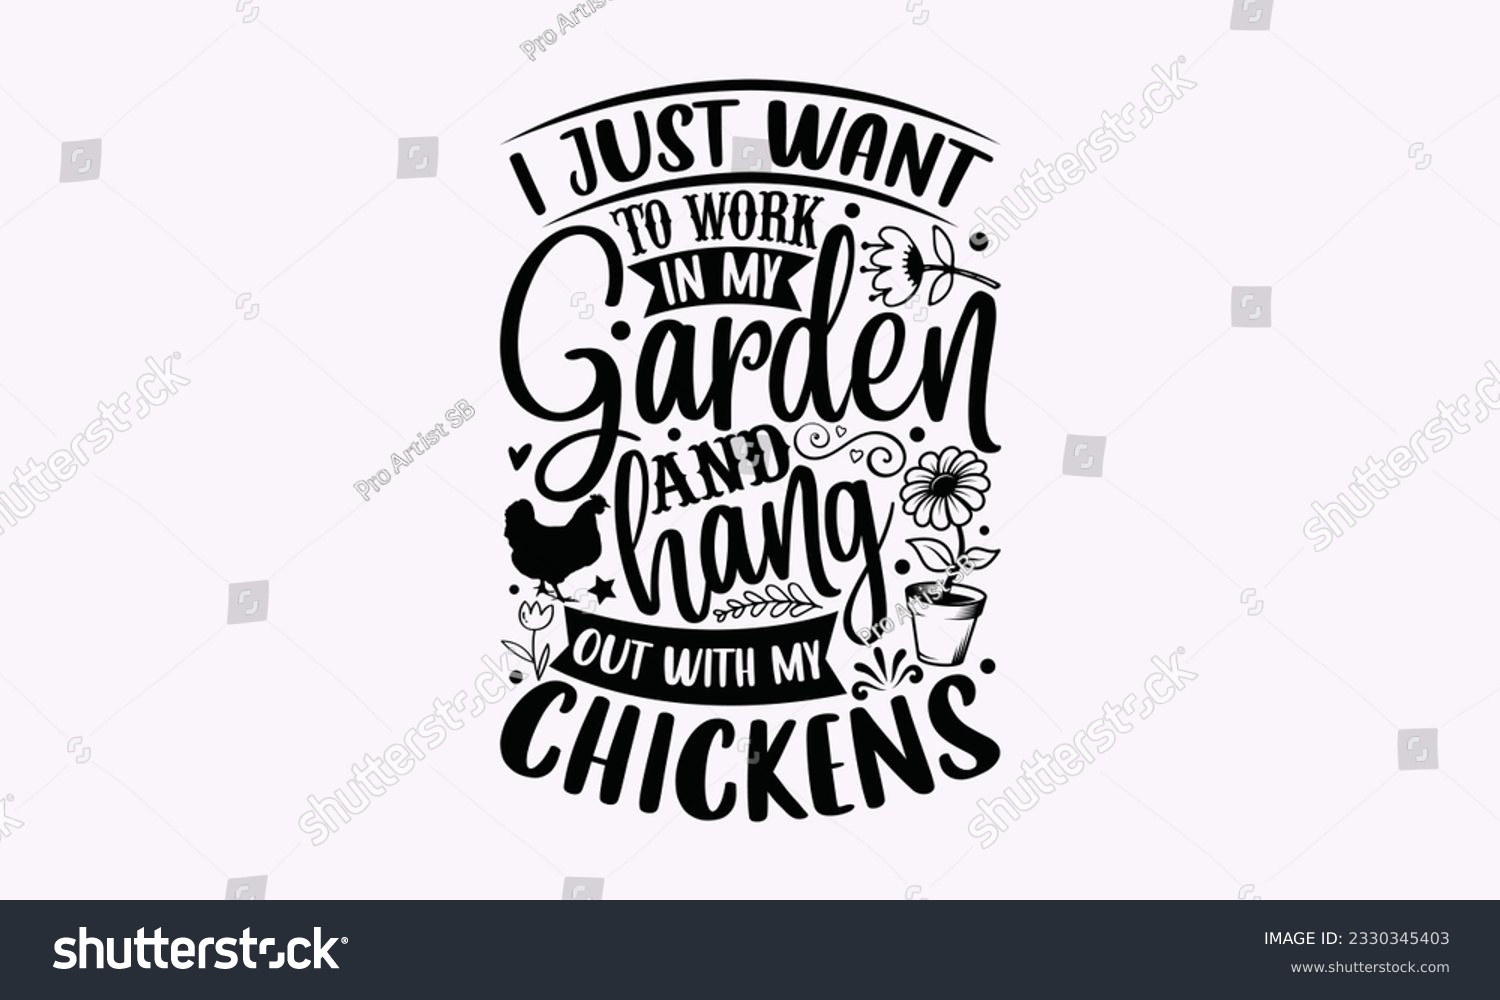 SVG of I just want to work in my garden and hang out with my chickens - Gardening SVG Design, Flower Quotes, Calligraphy graphic design, Typography poster with old style camera and quote. svg